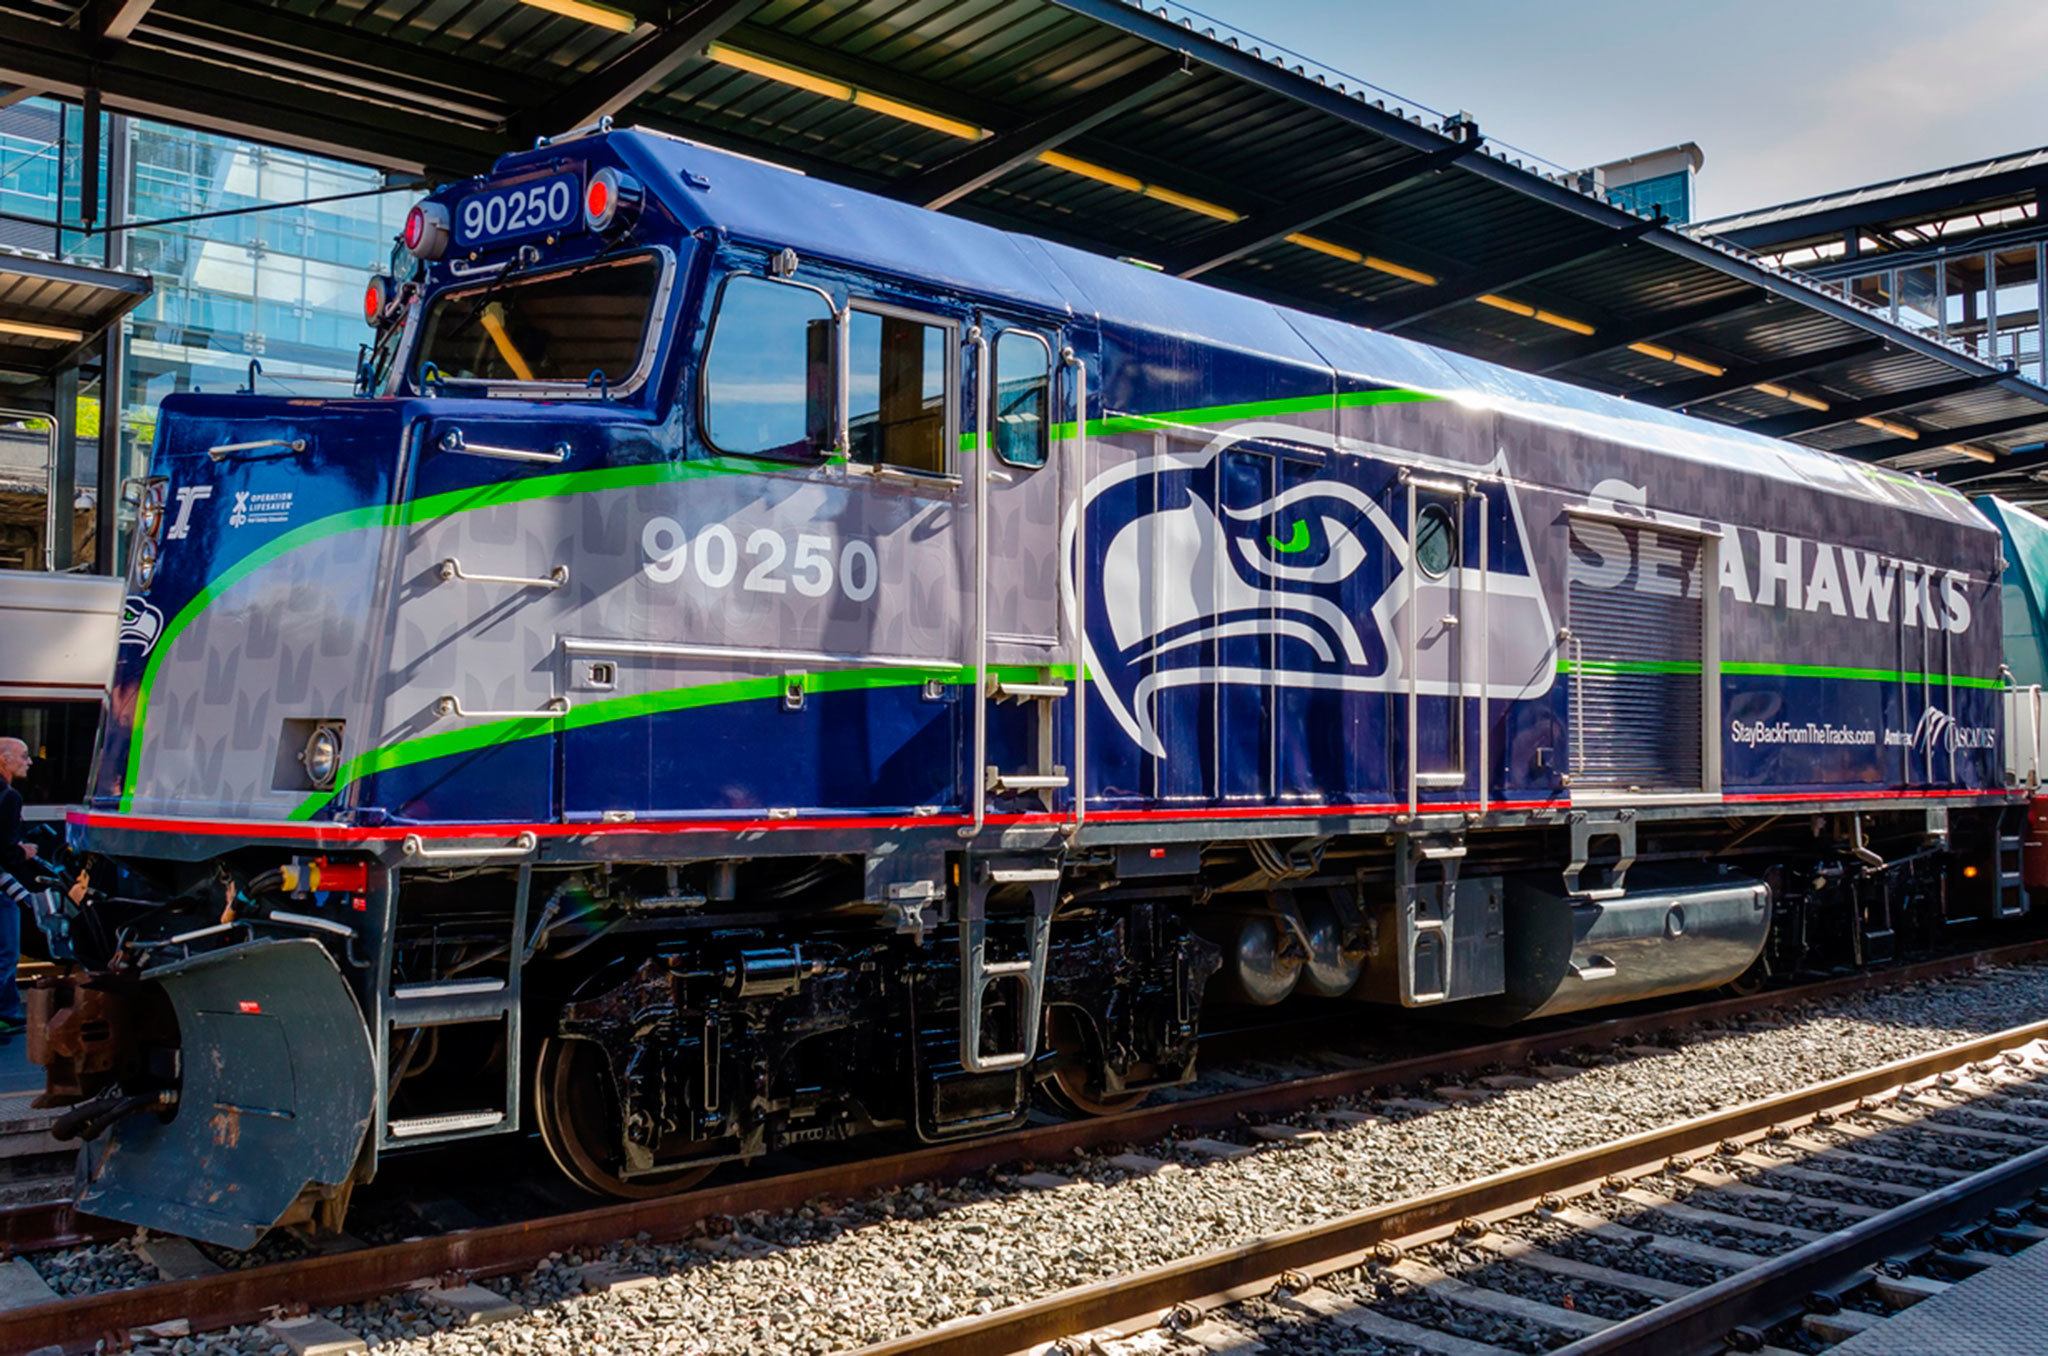 The new Amtrak Cascades Seahawks train was unveiled on Oct. 12. COURTESY PHOTO